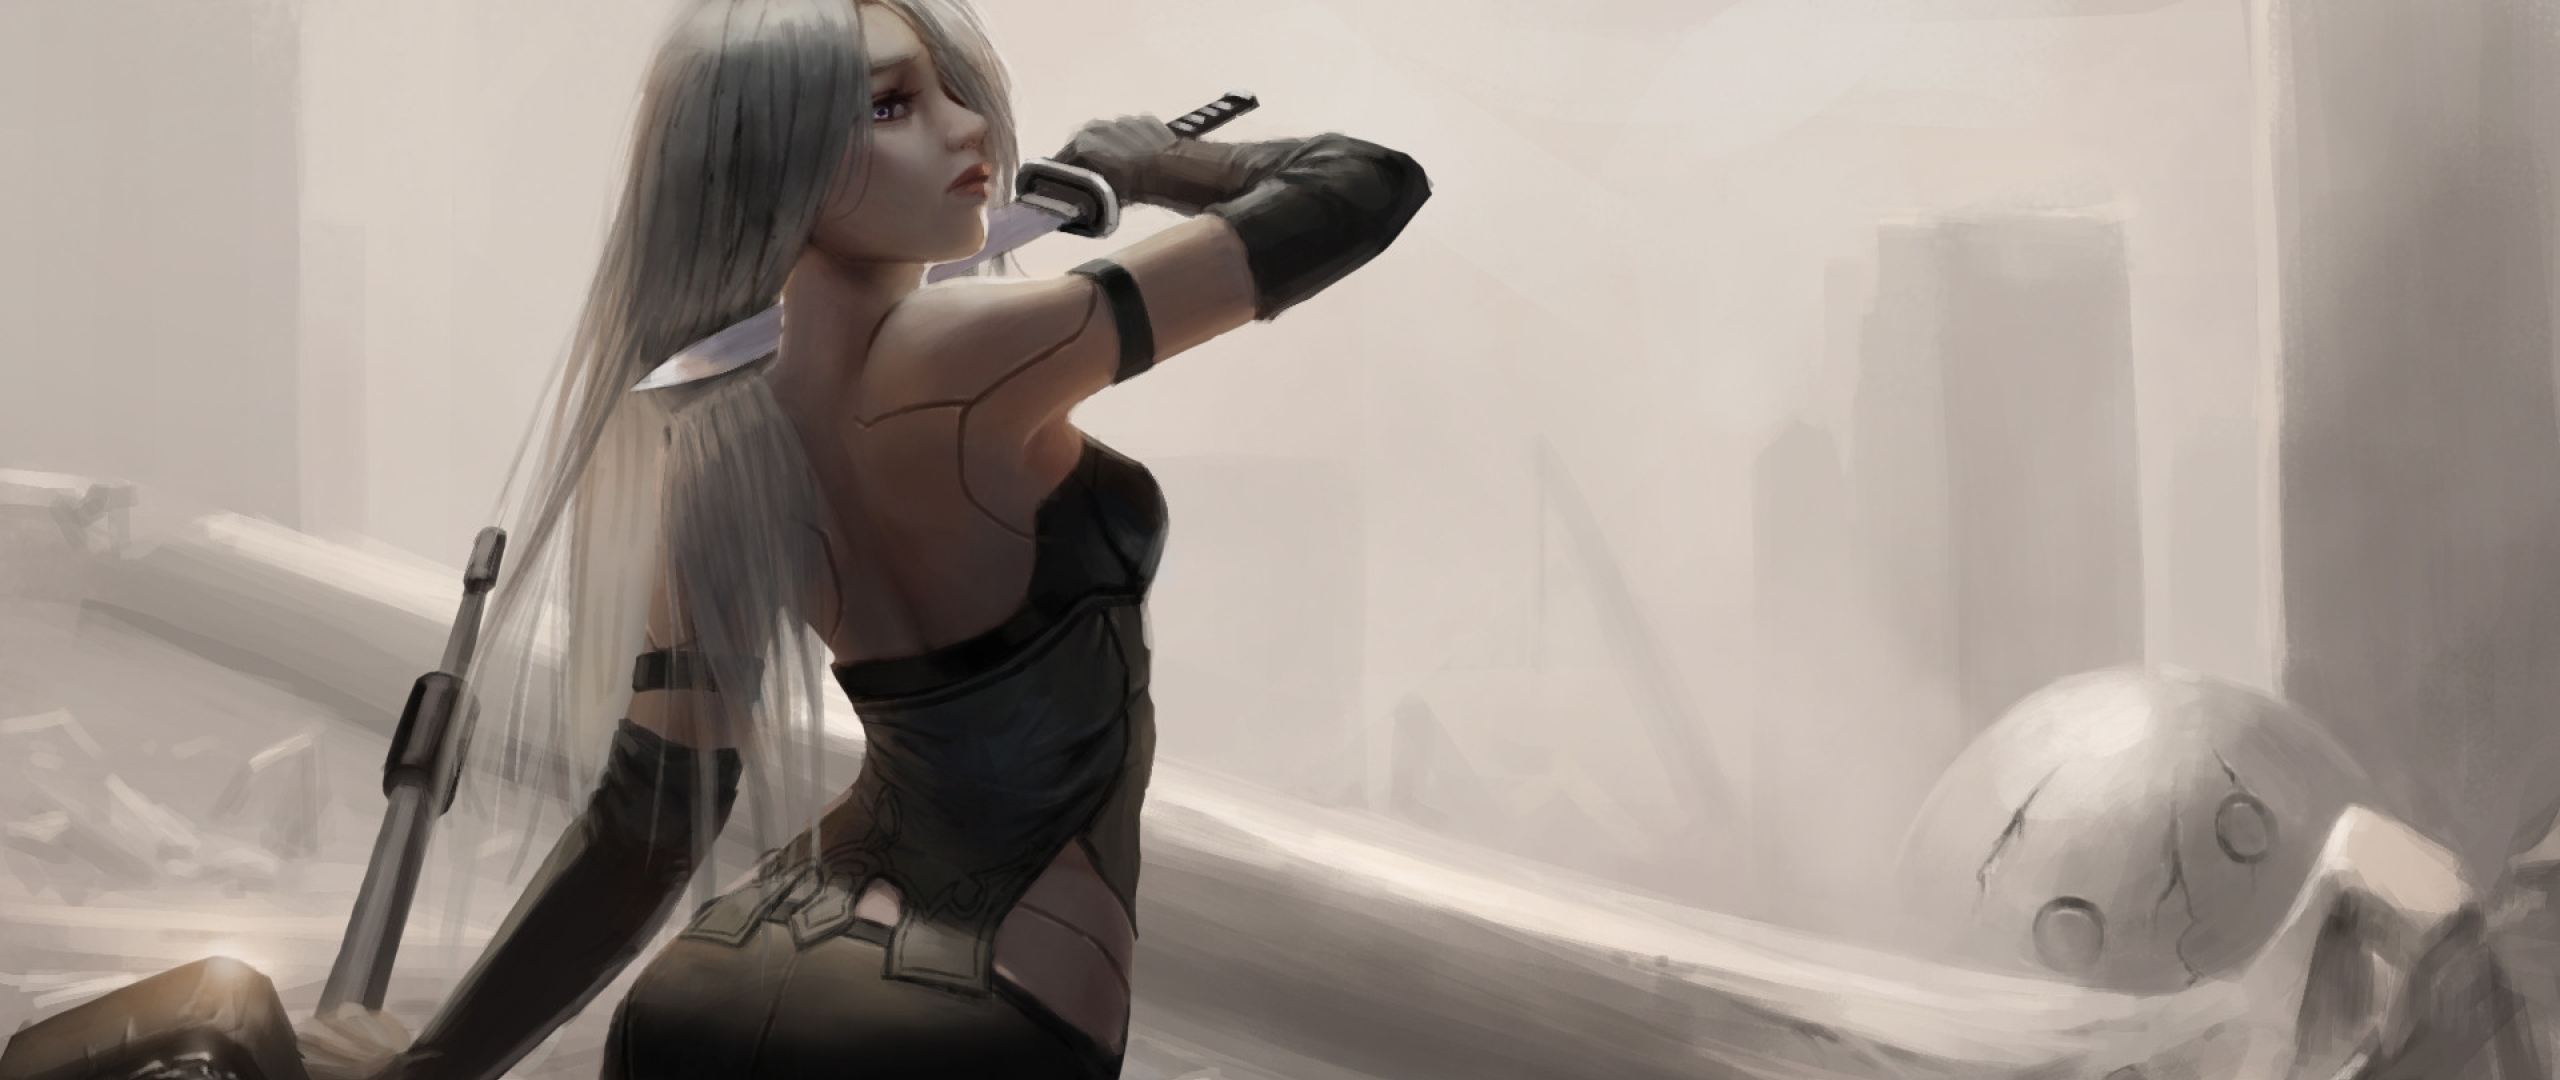 2560x1080 Nier Automata Fan Art 2560x1080 Resolution Wallpaper Hd Games 4k Wallpapers Images Photos And Background